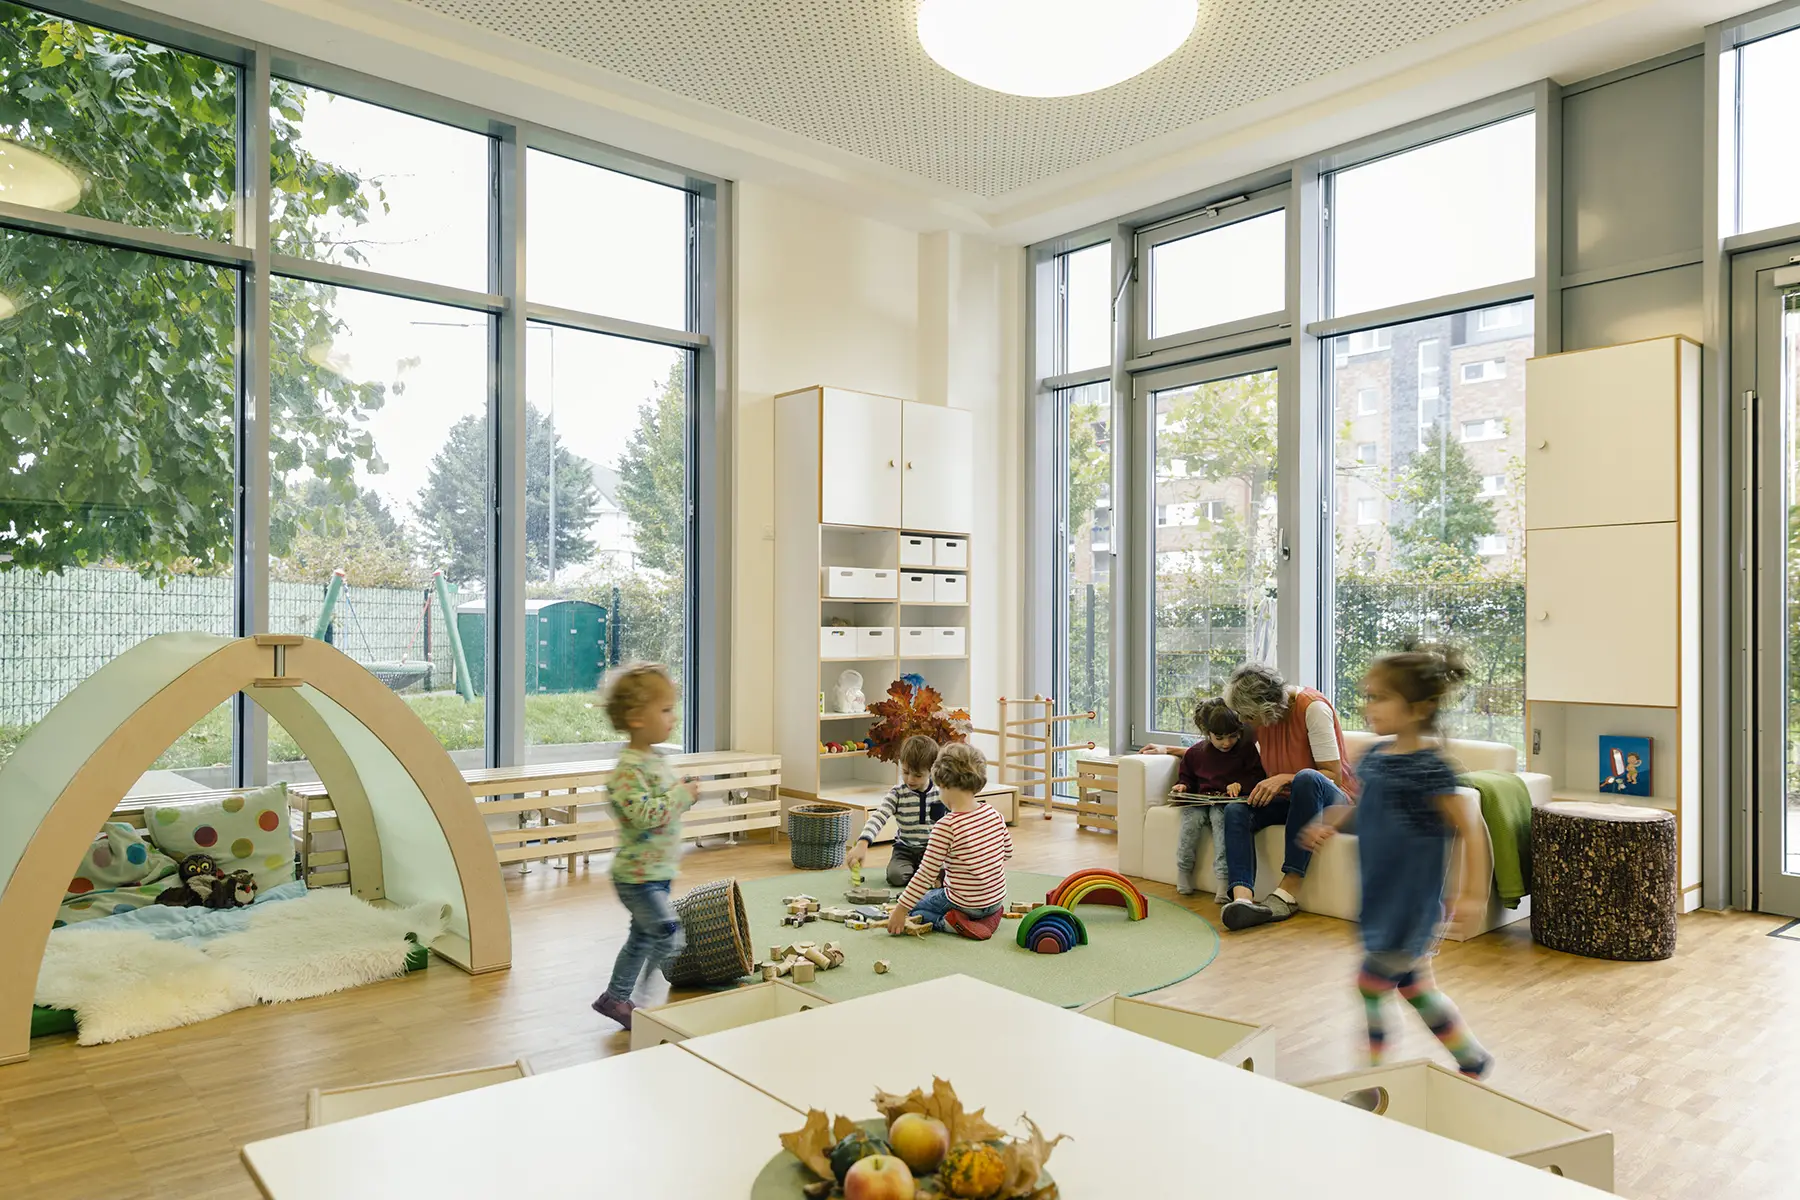 Children playing in a nursery/daycare room